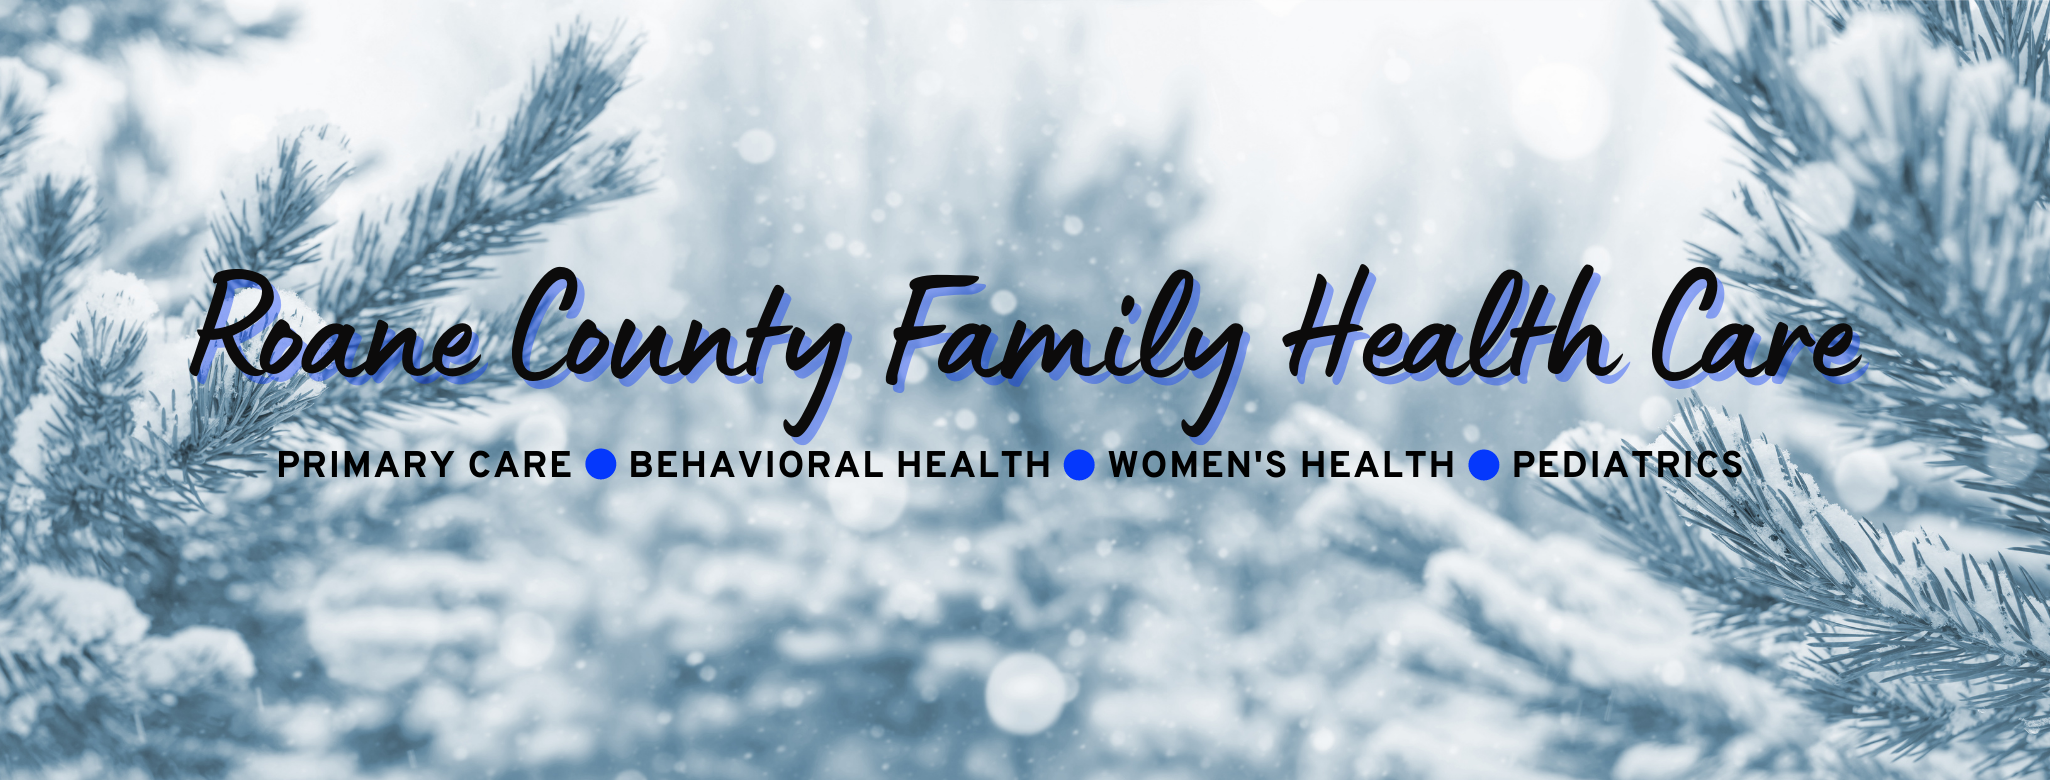 Roane County Family Health Care